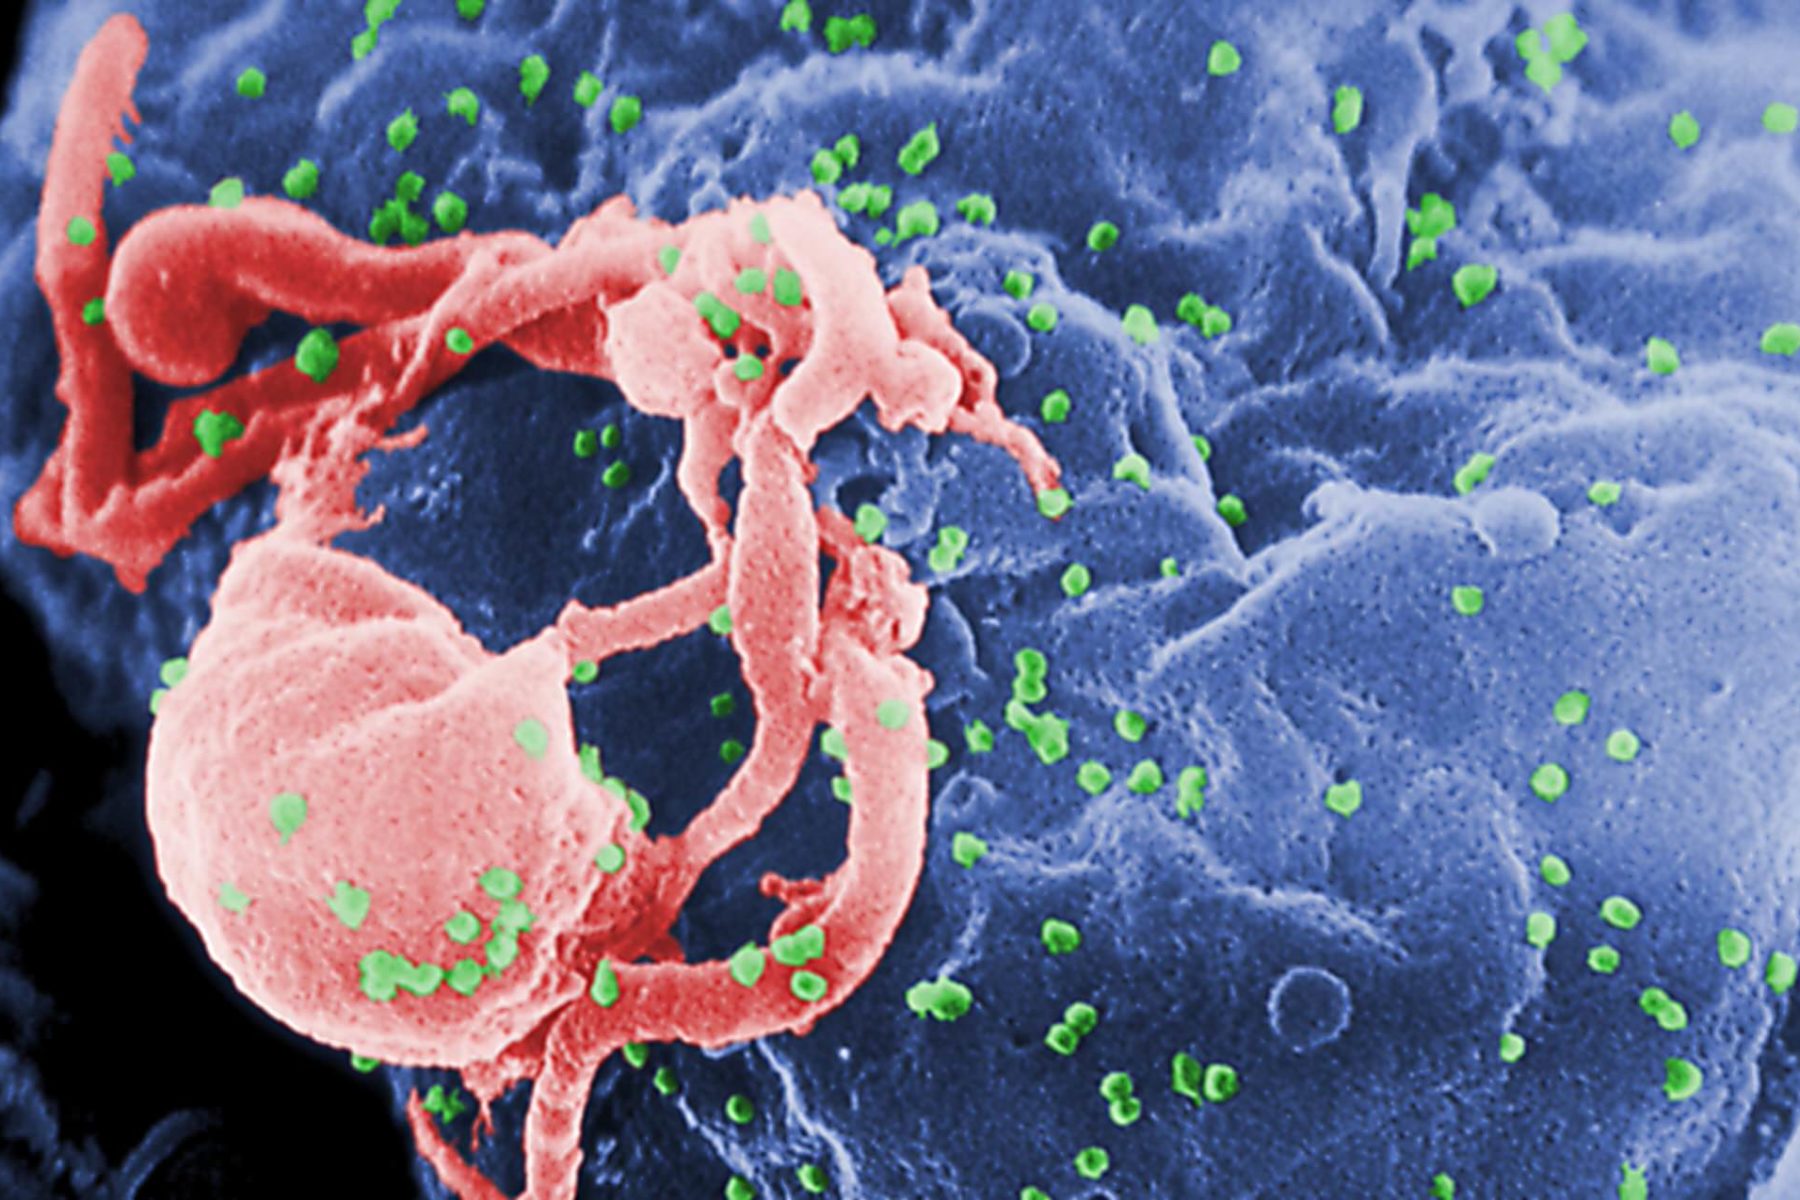 Scanning electron micrograph (SEM) of HIV-1 virions as green round bumps budding from the surface of a cultured lymphocyte cell.